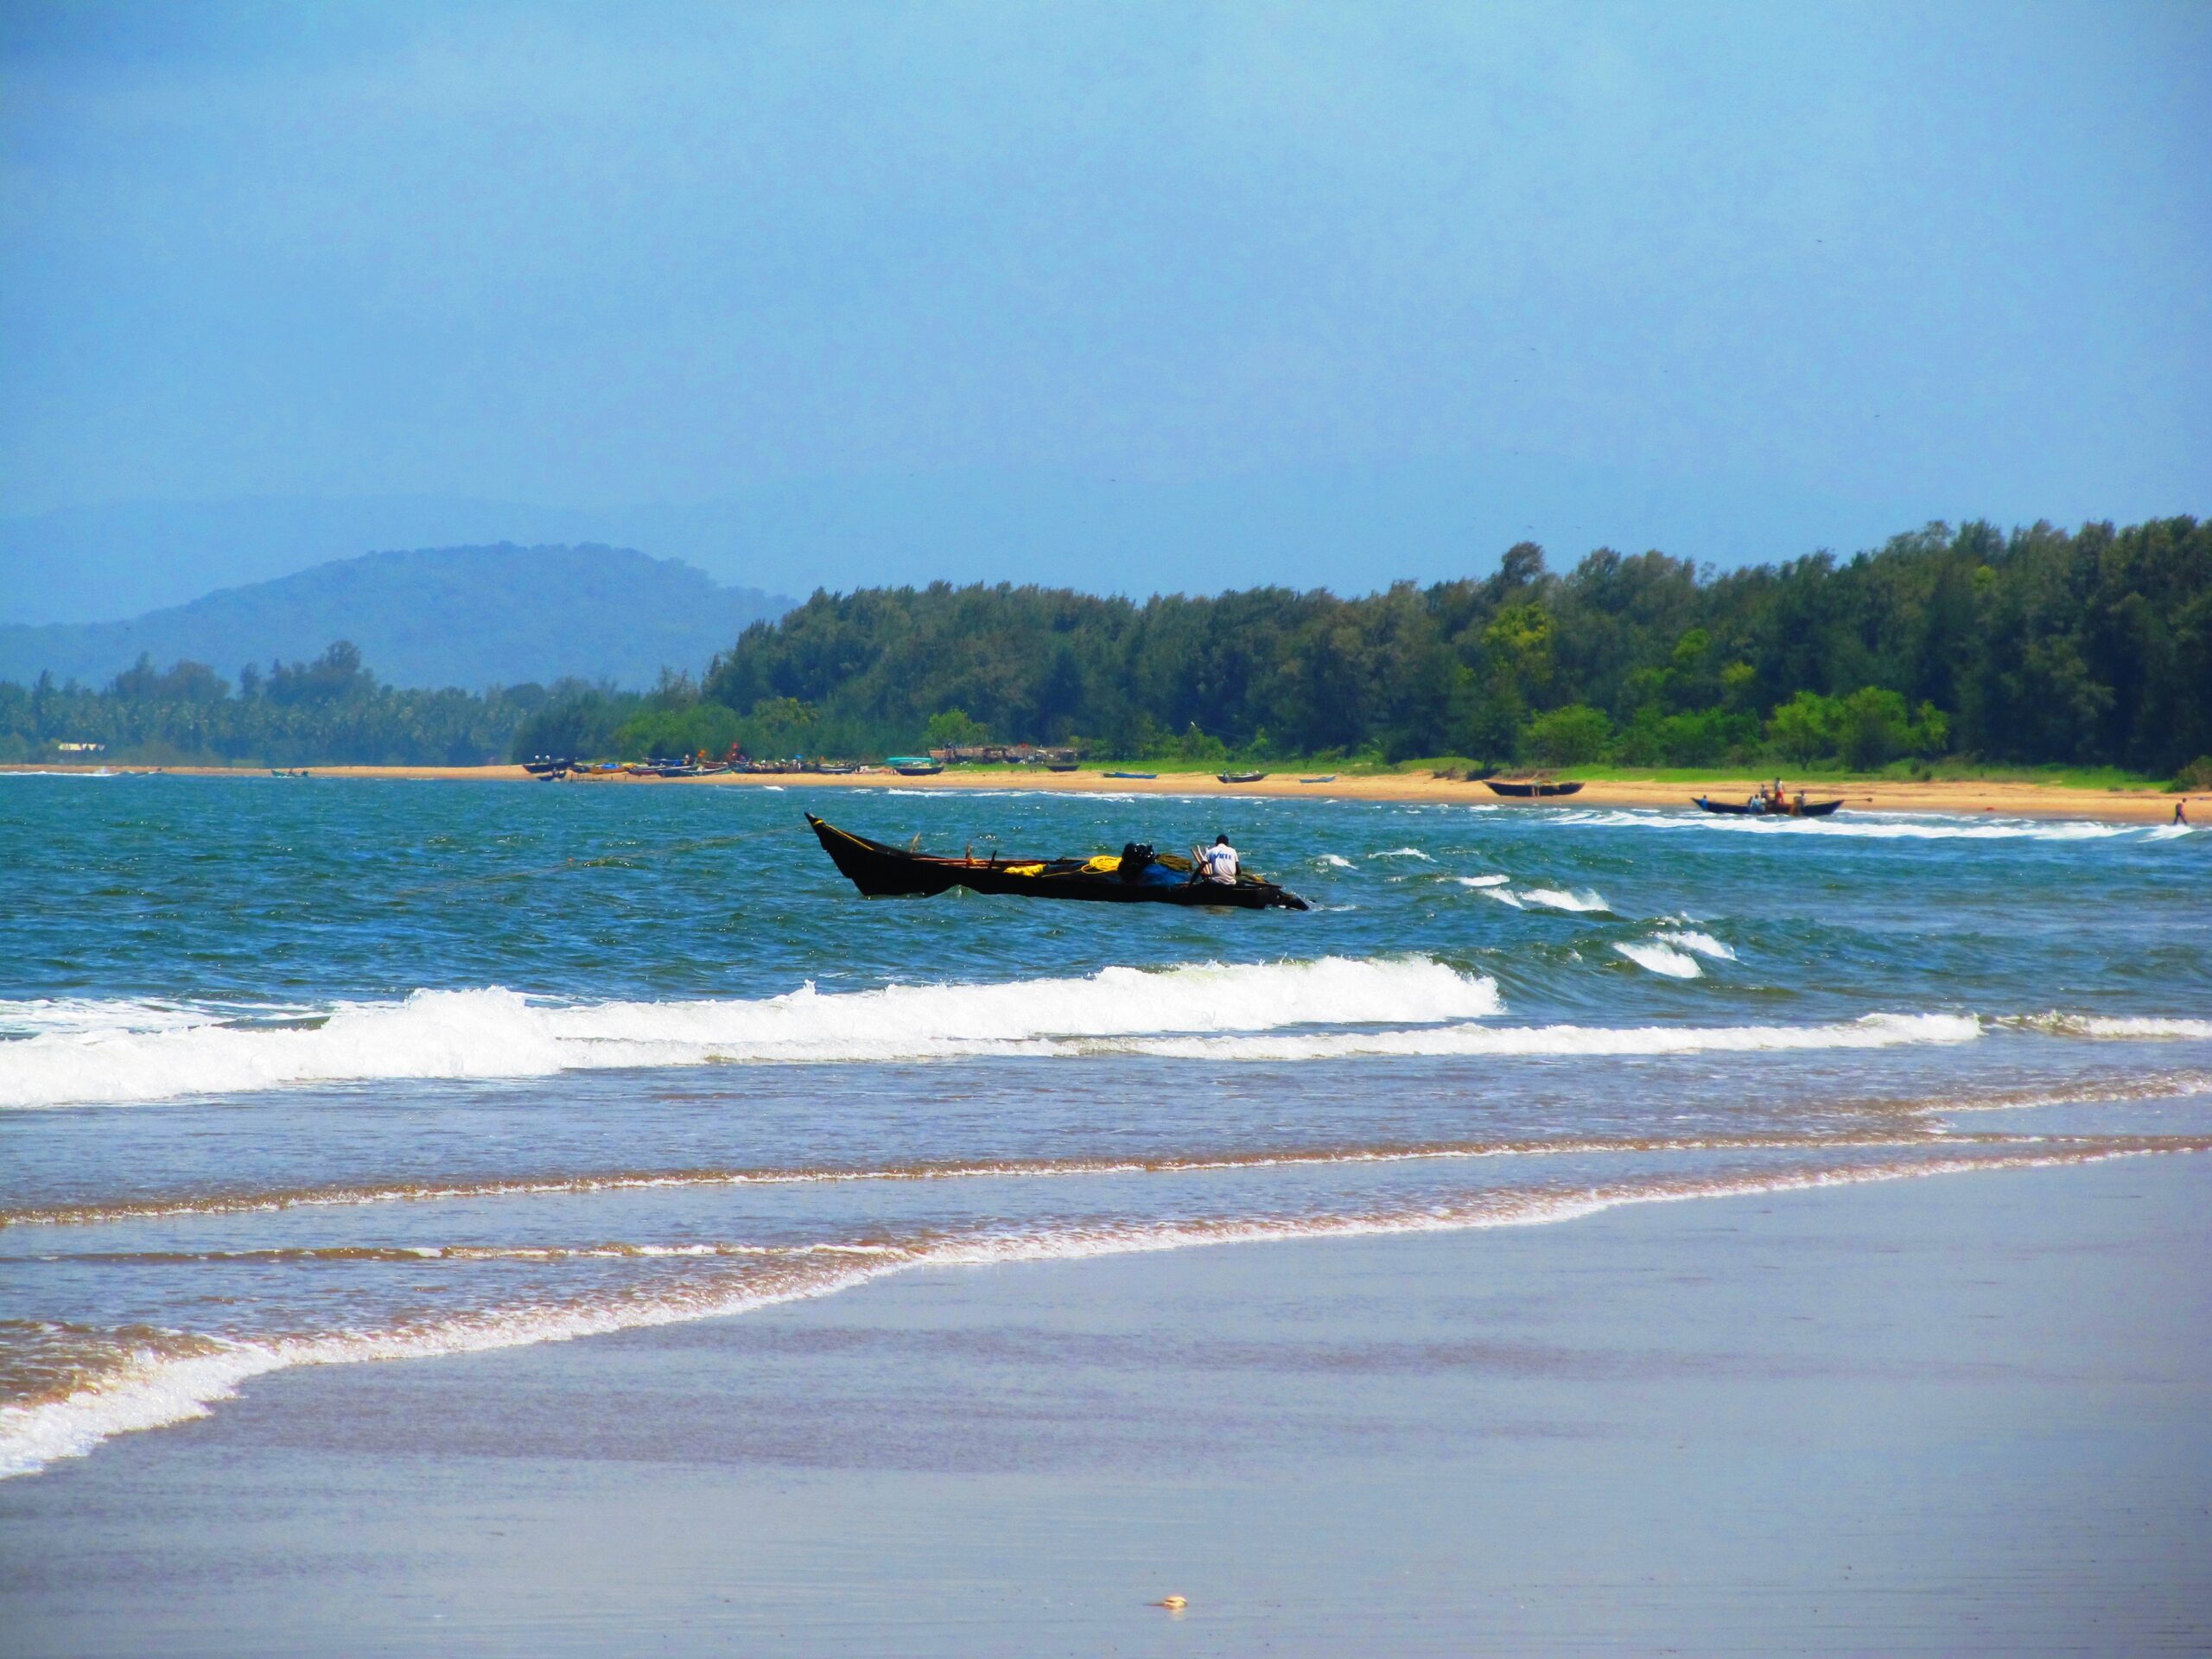 Goa bans drinking, canvassing for activities in Karwar on its beaches